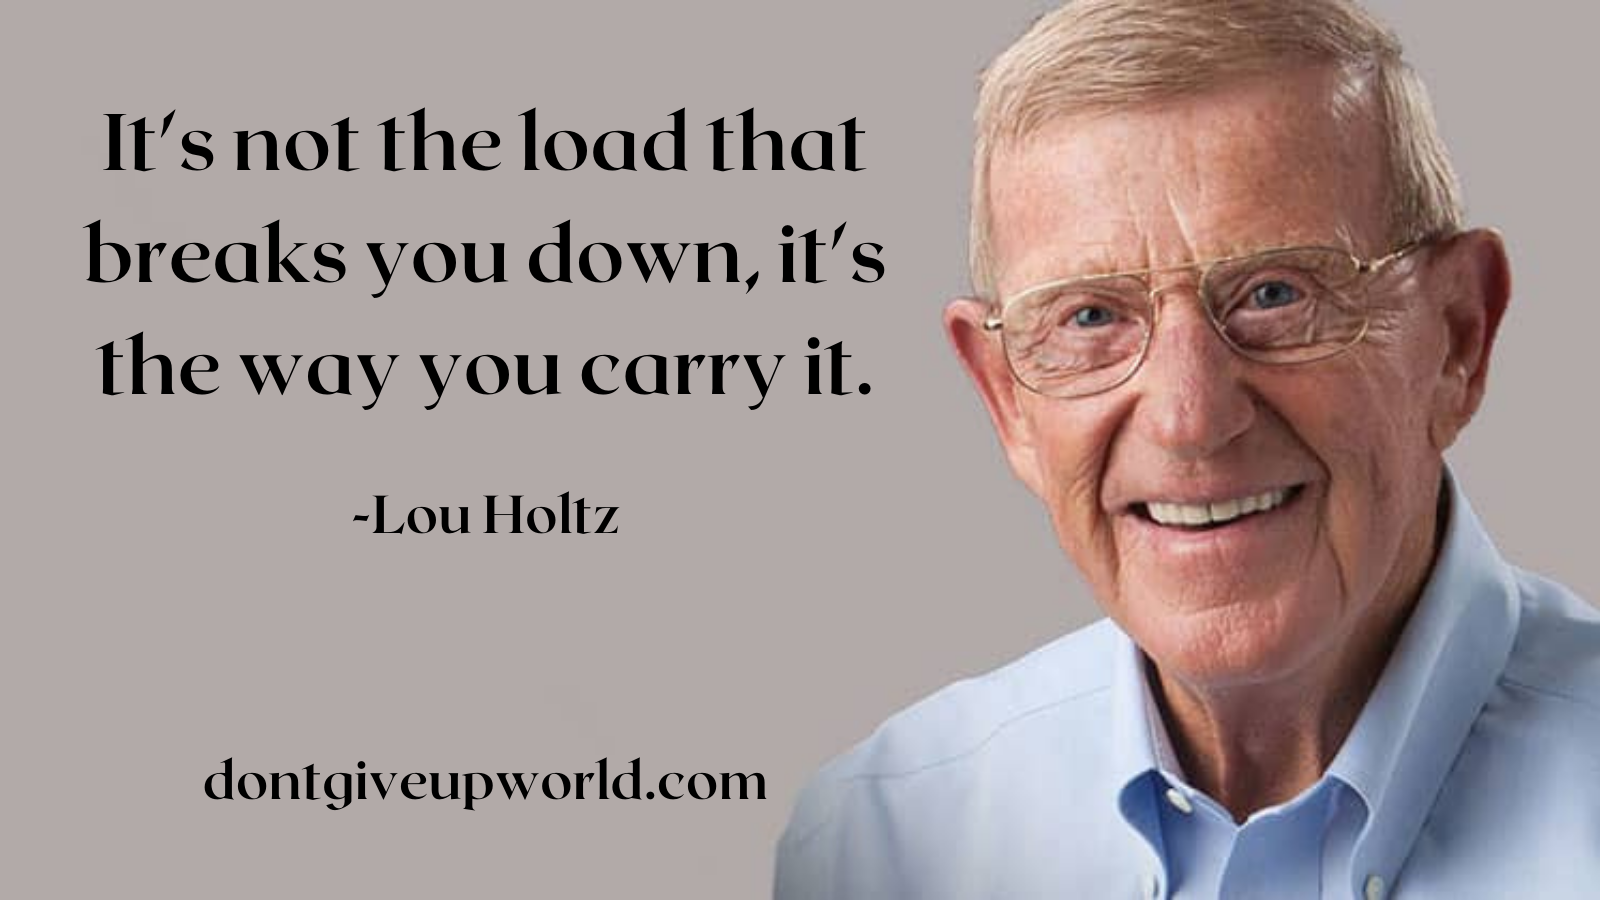 quote-on-load-that-breaks-you-down-by-lou-holtz-dont-give-up-world